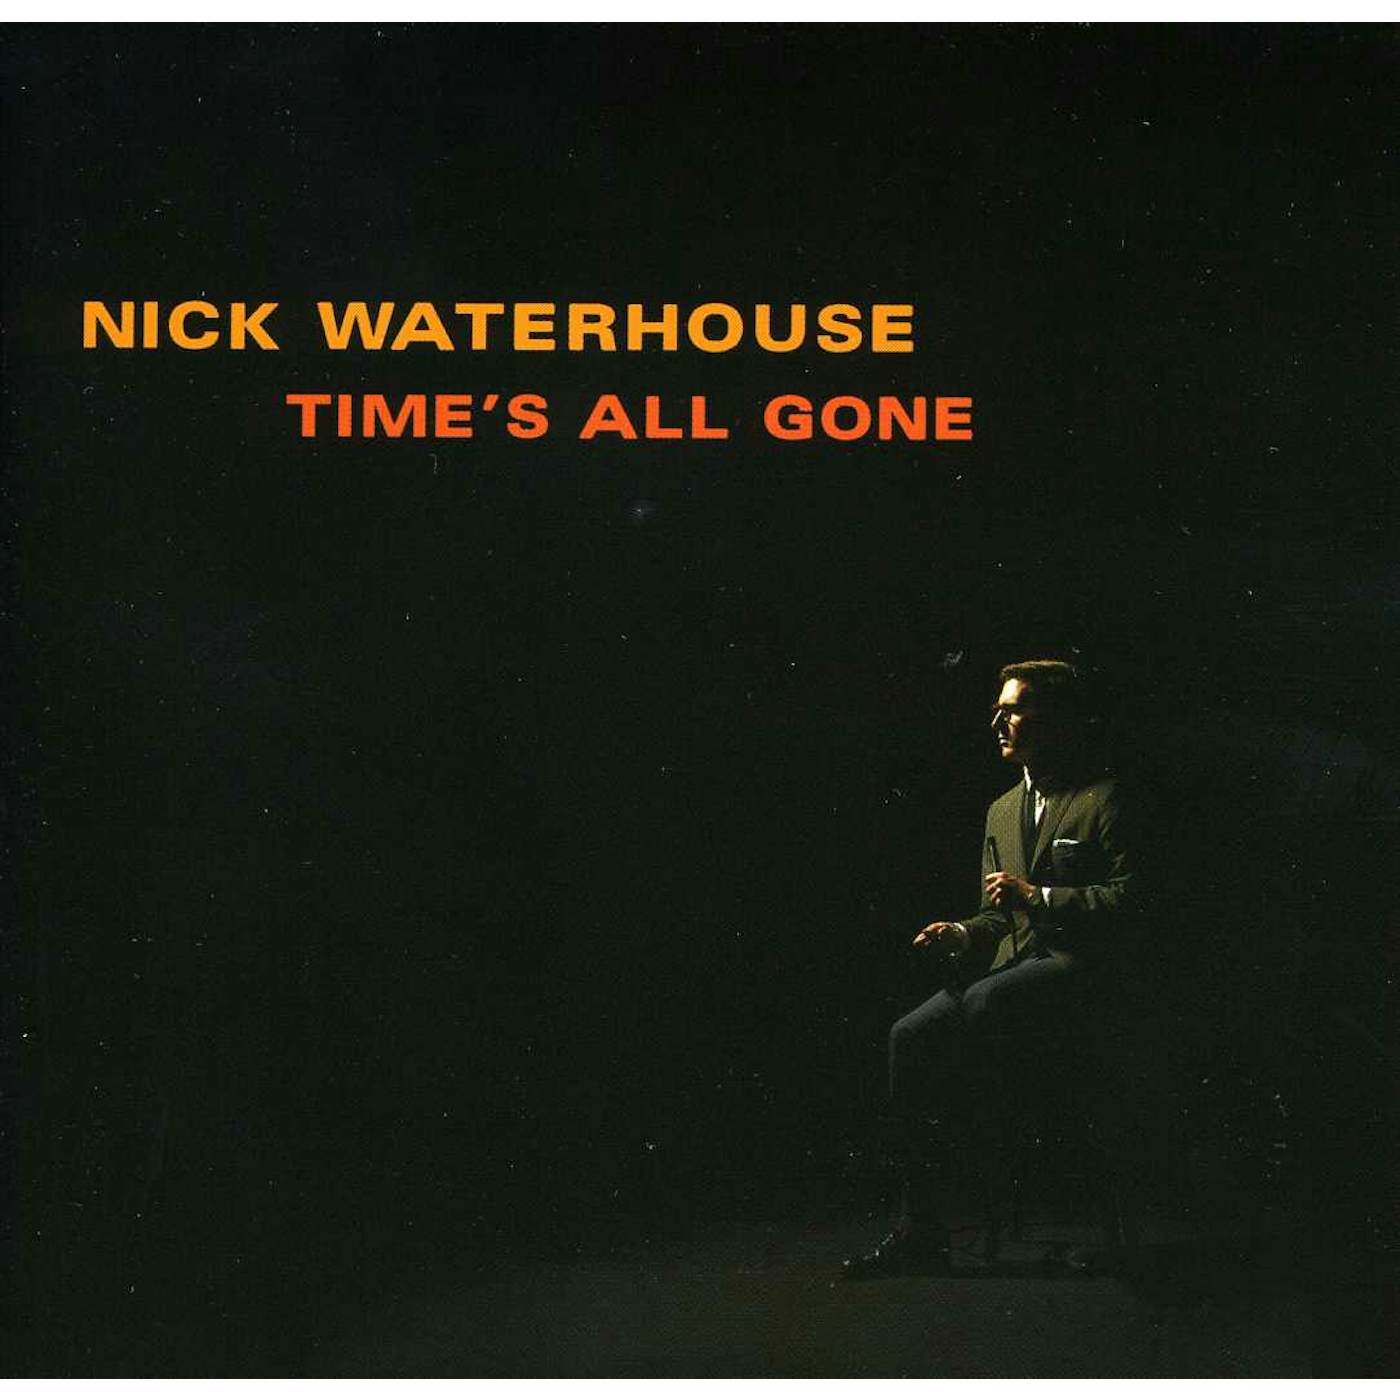 Nick Waterhouse TIME'S ALL GONE CD